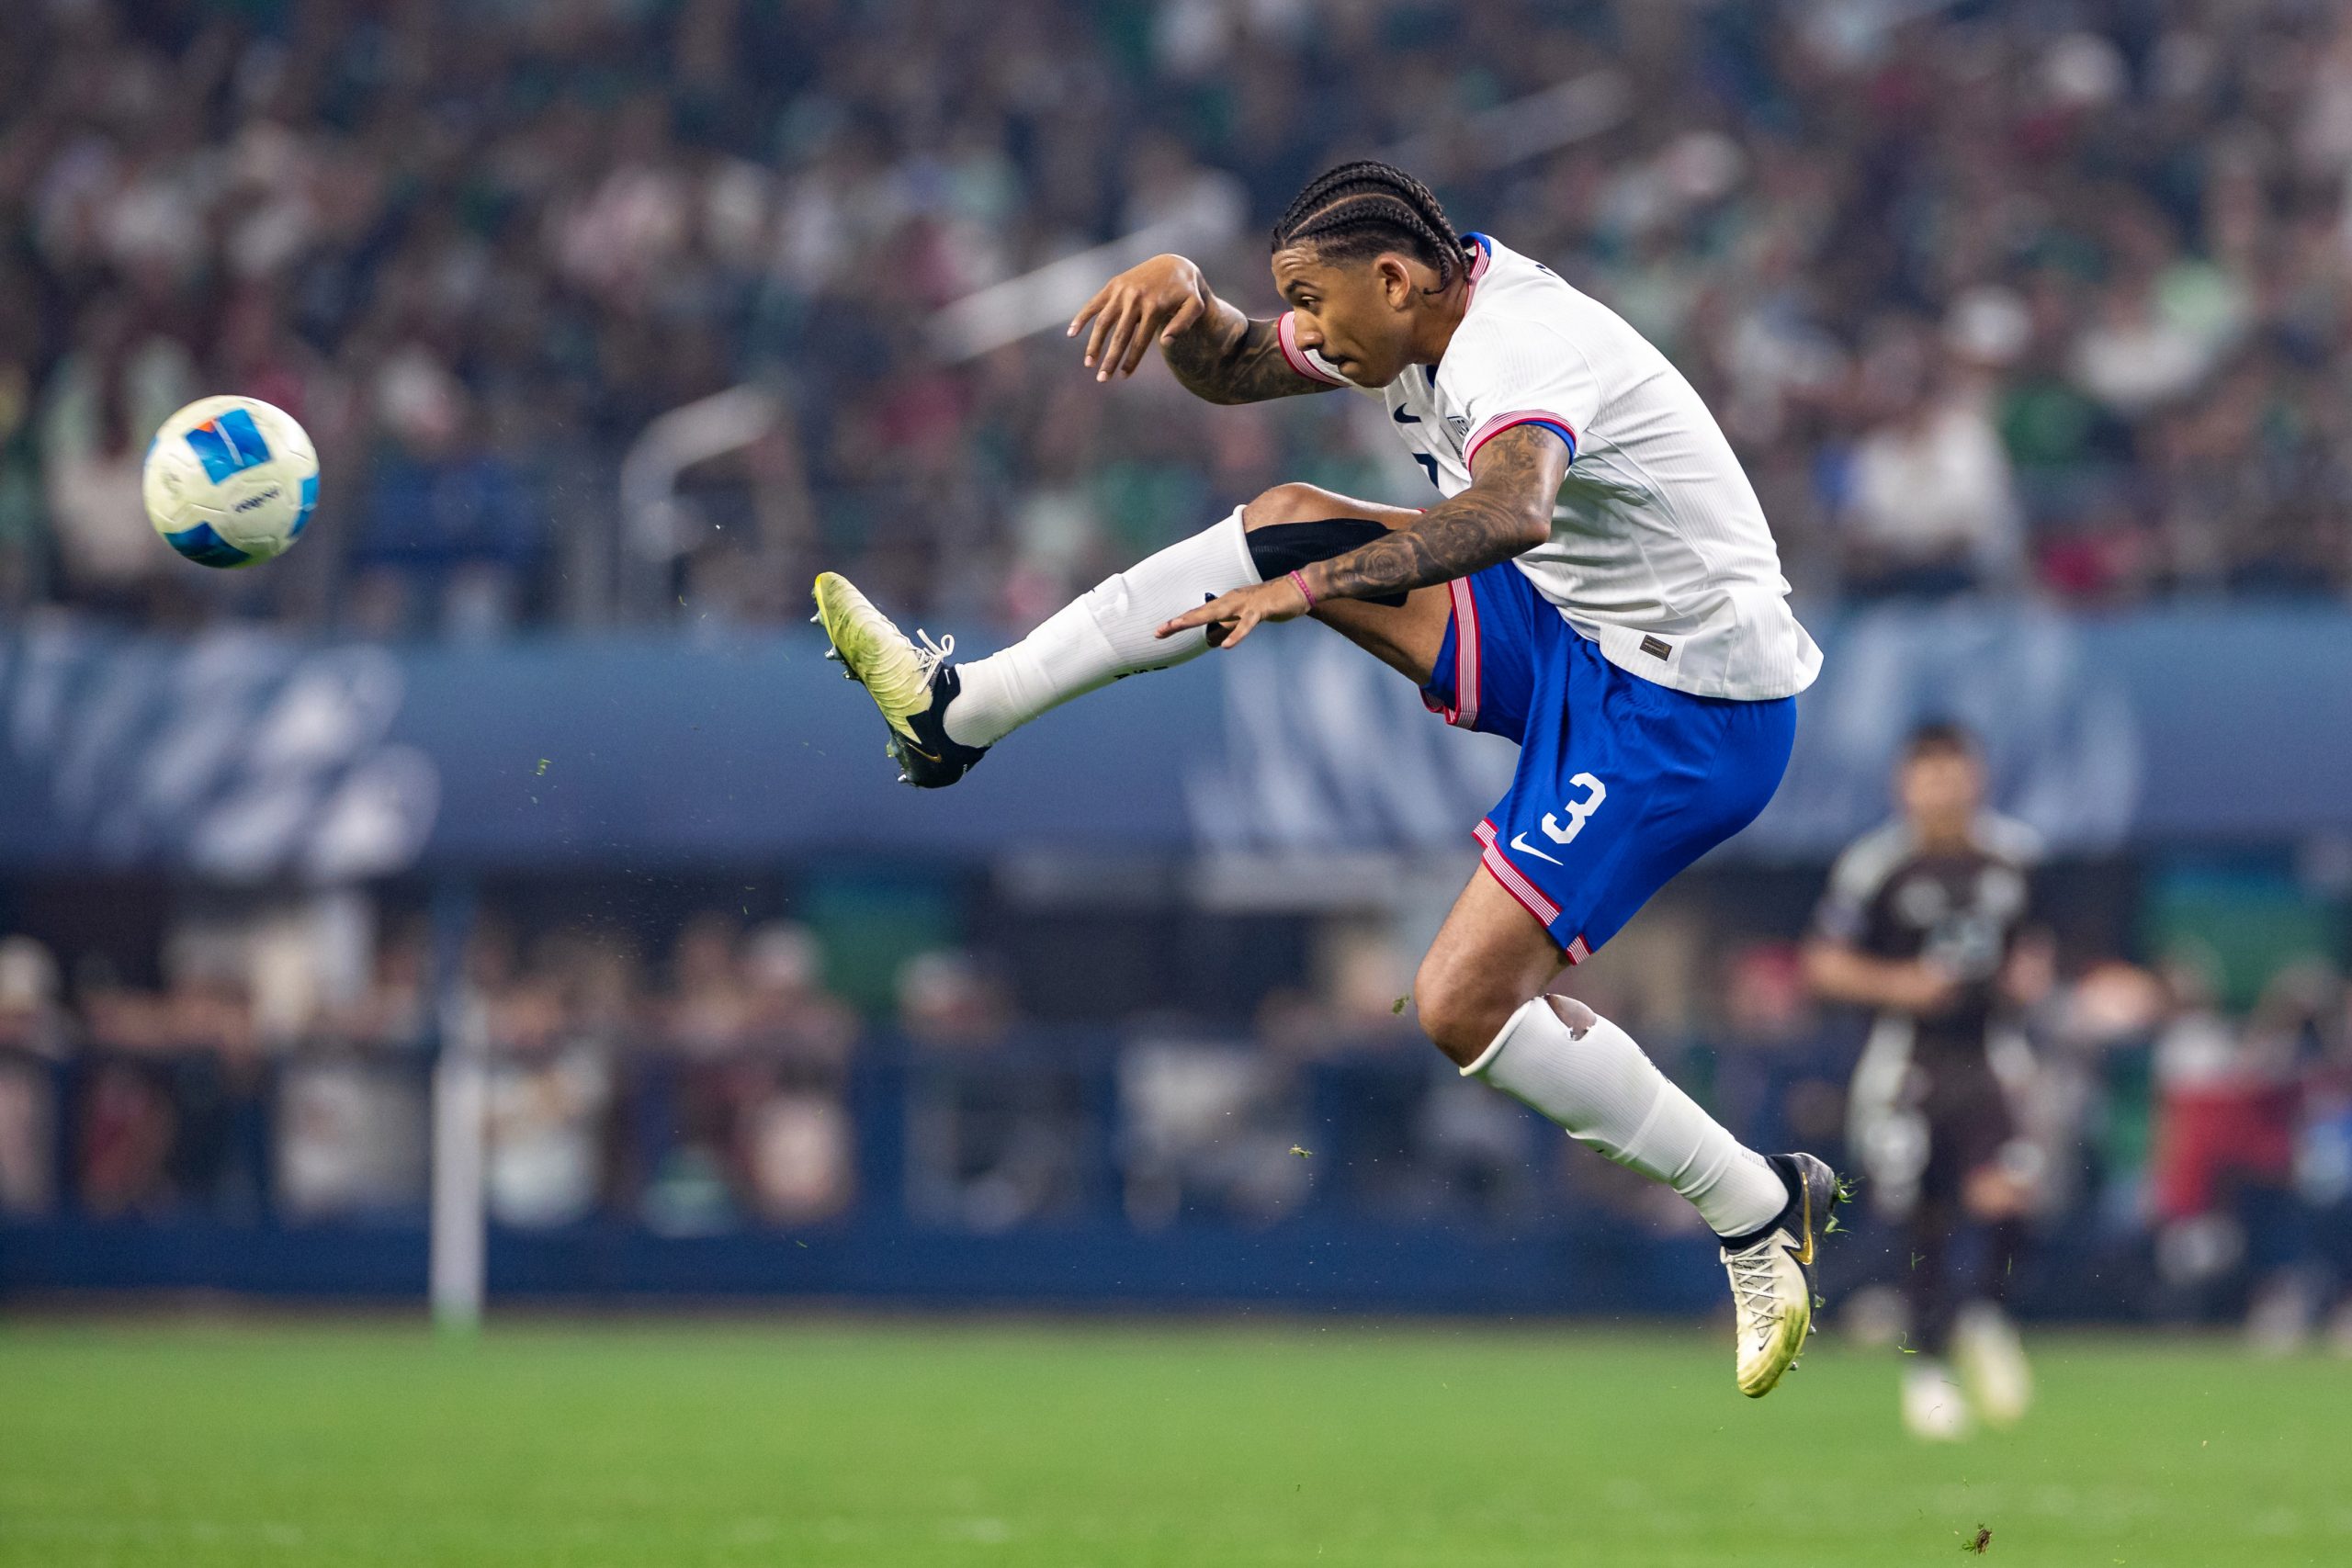 Chris Richards is focused on the ball in the USA's 2-0 Nations League Final win over Mexico, March 24, 2024. (Matt Visinsky, 3rd Degree)